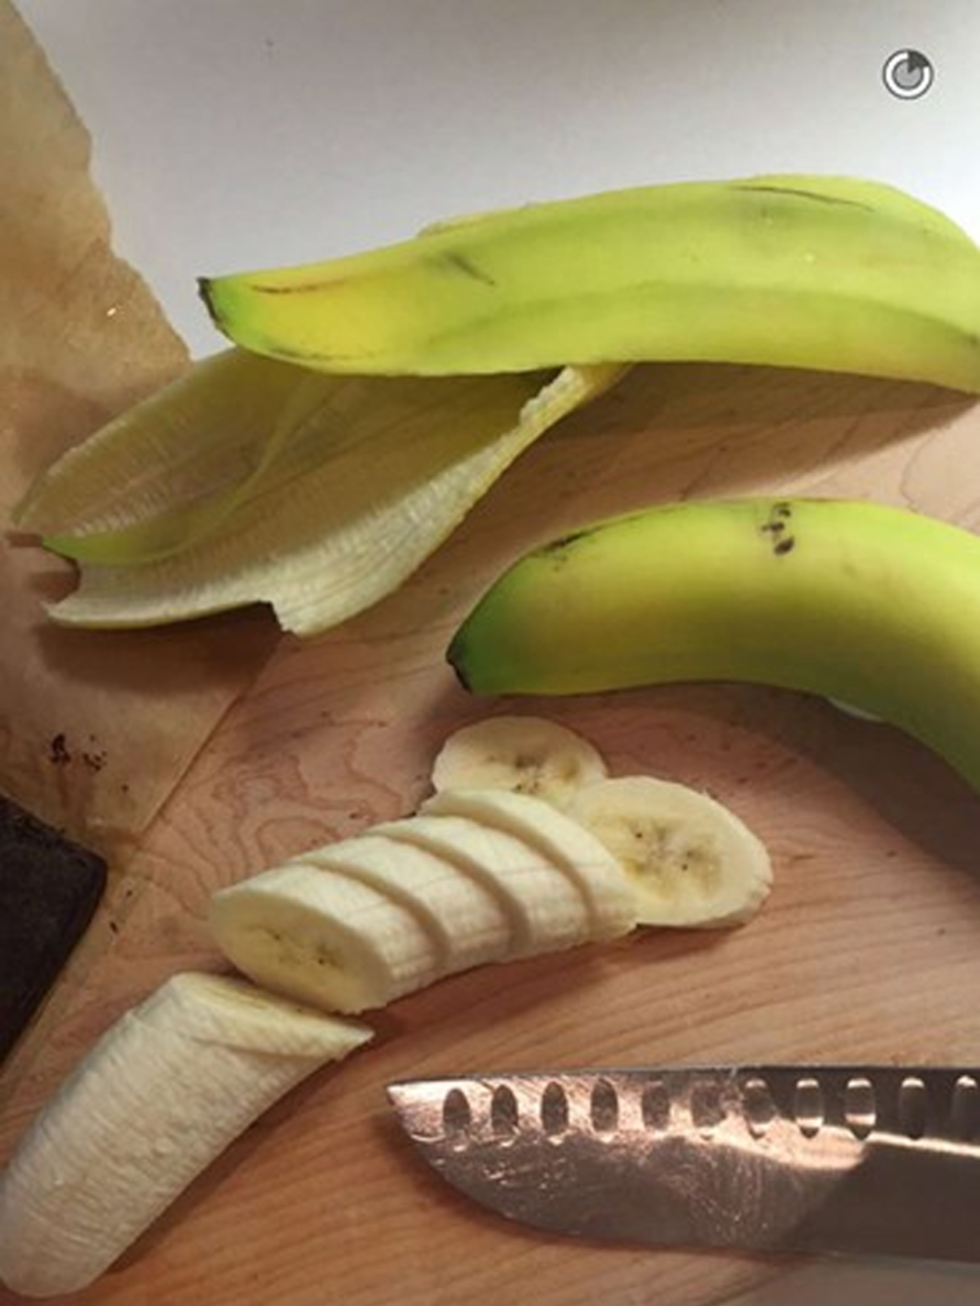 Yellow, Food, Natural foods, Vegan nutrition, Produce, Fruit, Ingredient, Whole food, Cooking plantain, Banana family, 